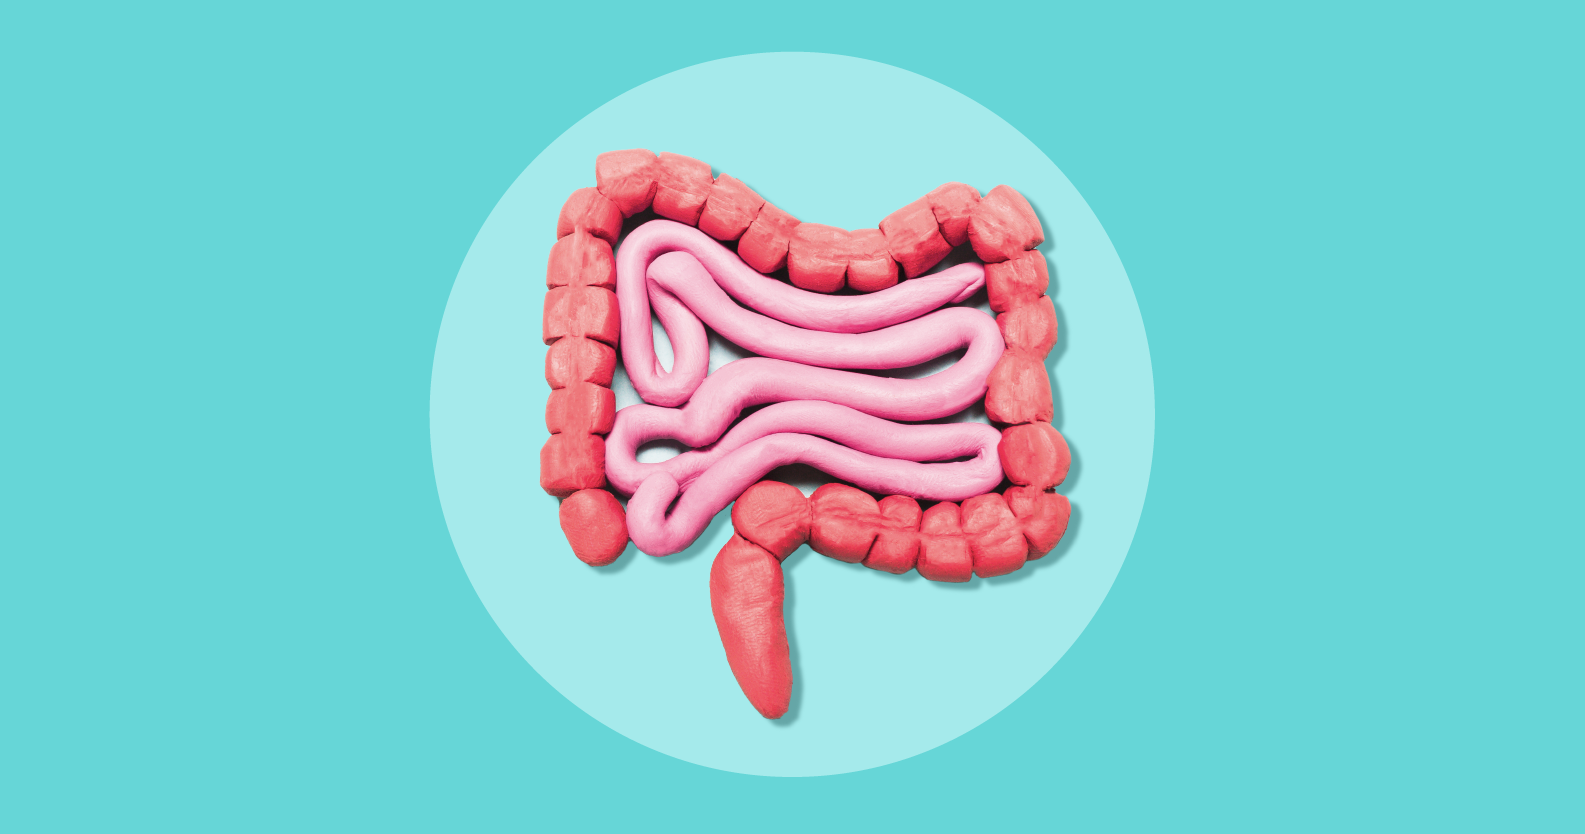 Screening for colon cancer: what you need to know